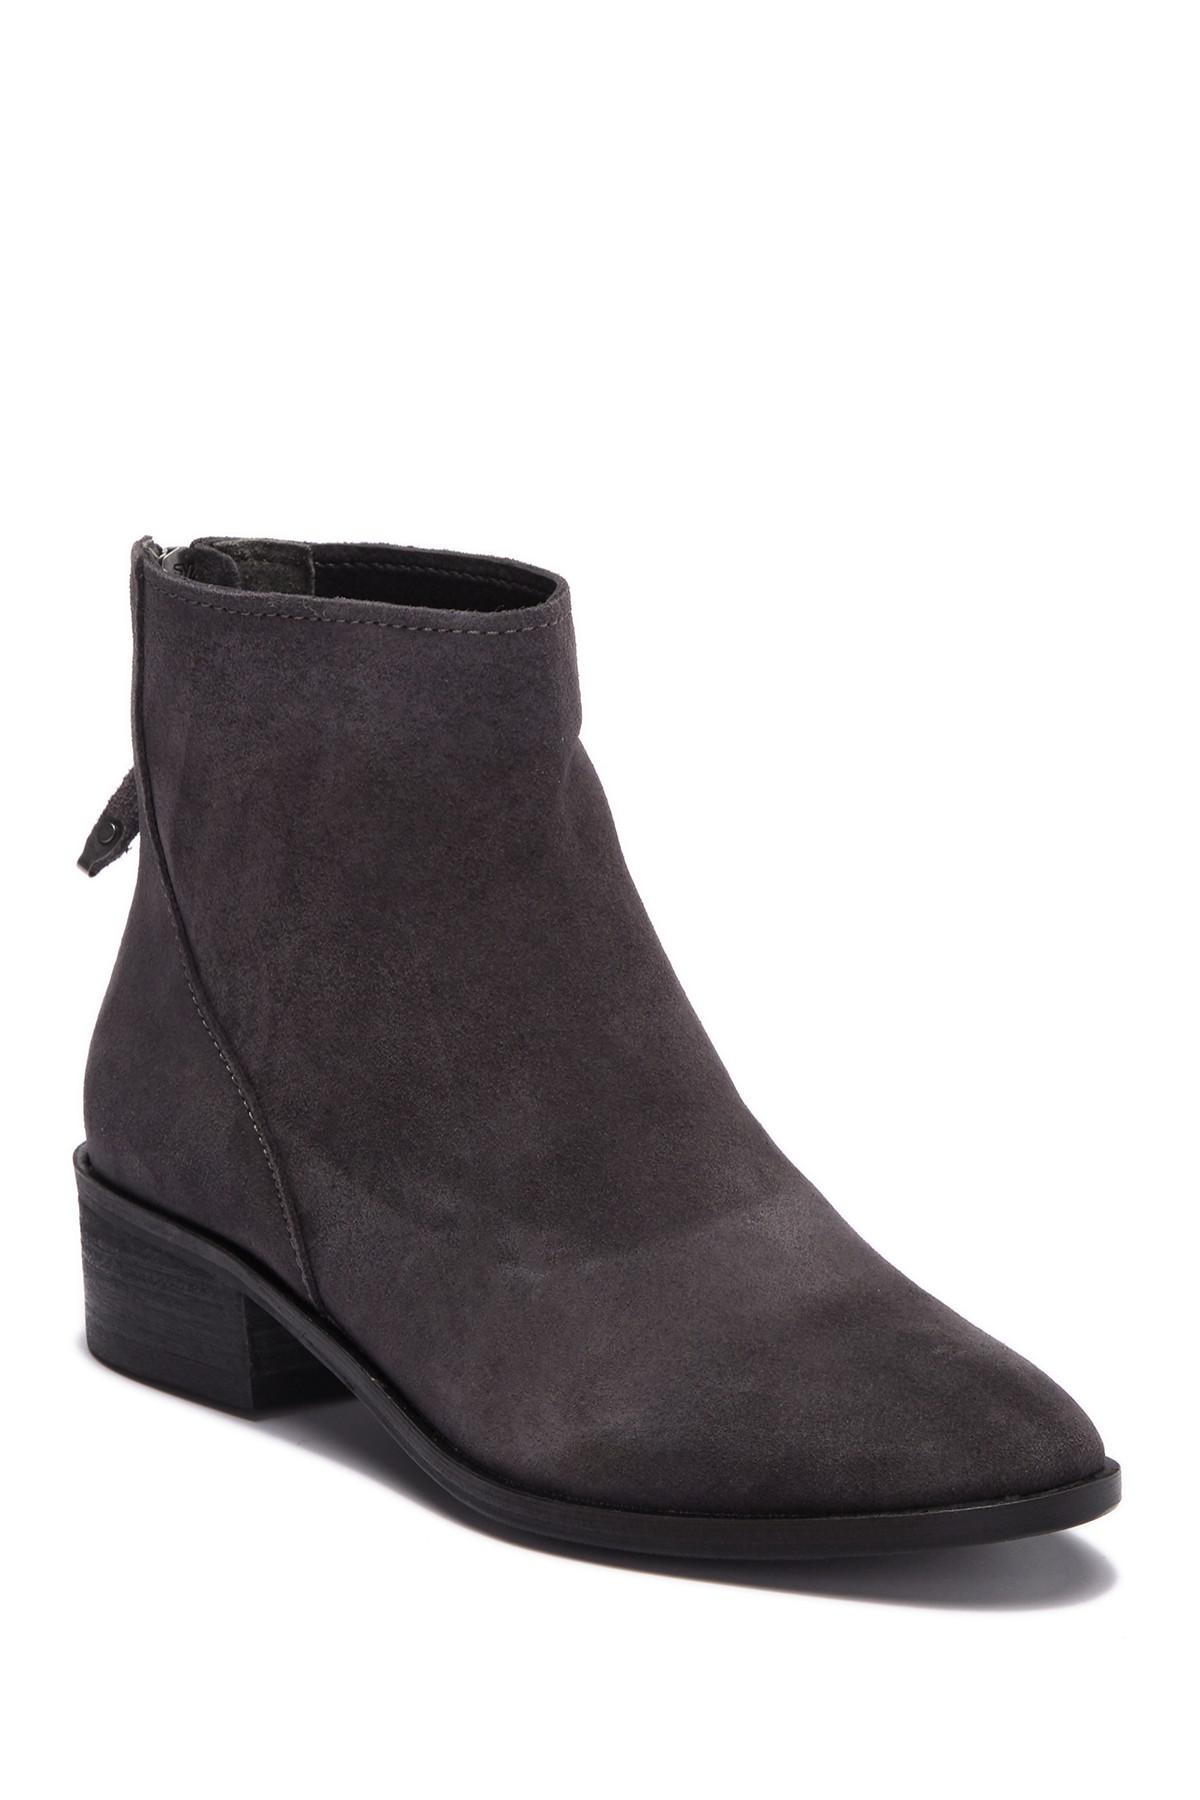 Dolce Vita Tassy Suede Ankle Boot - Lyst